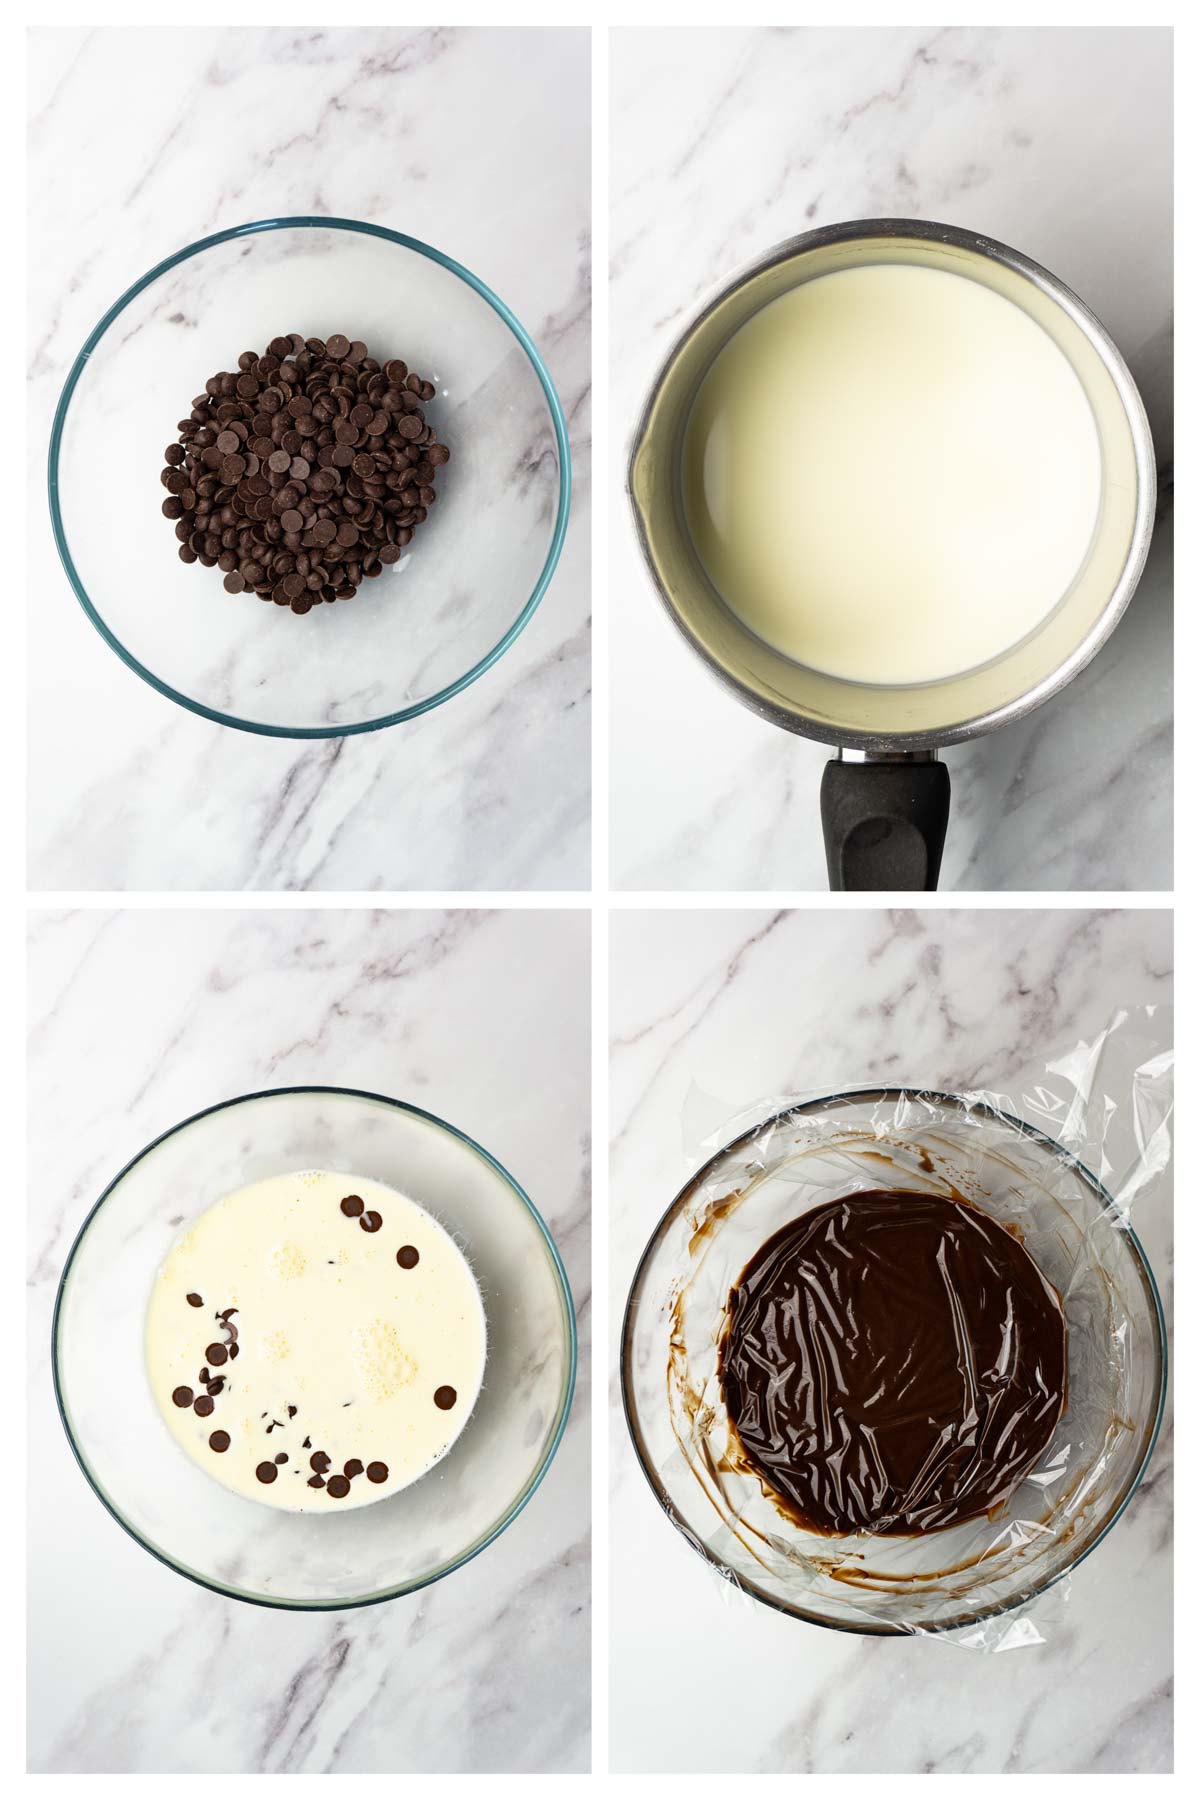 Collage image showing step by step directions to make chocolate ganache.